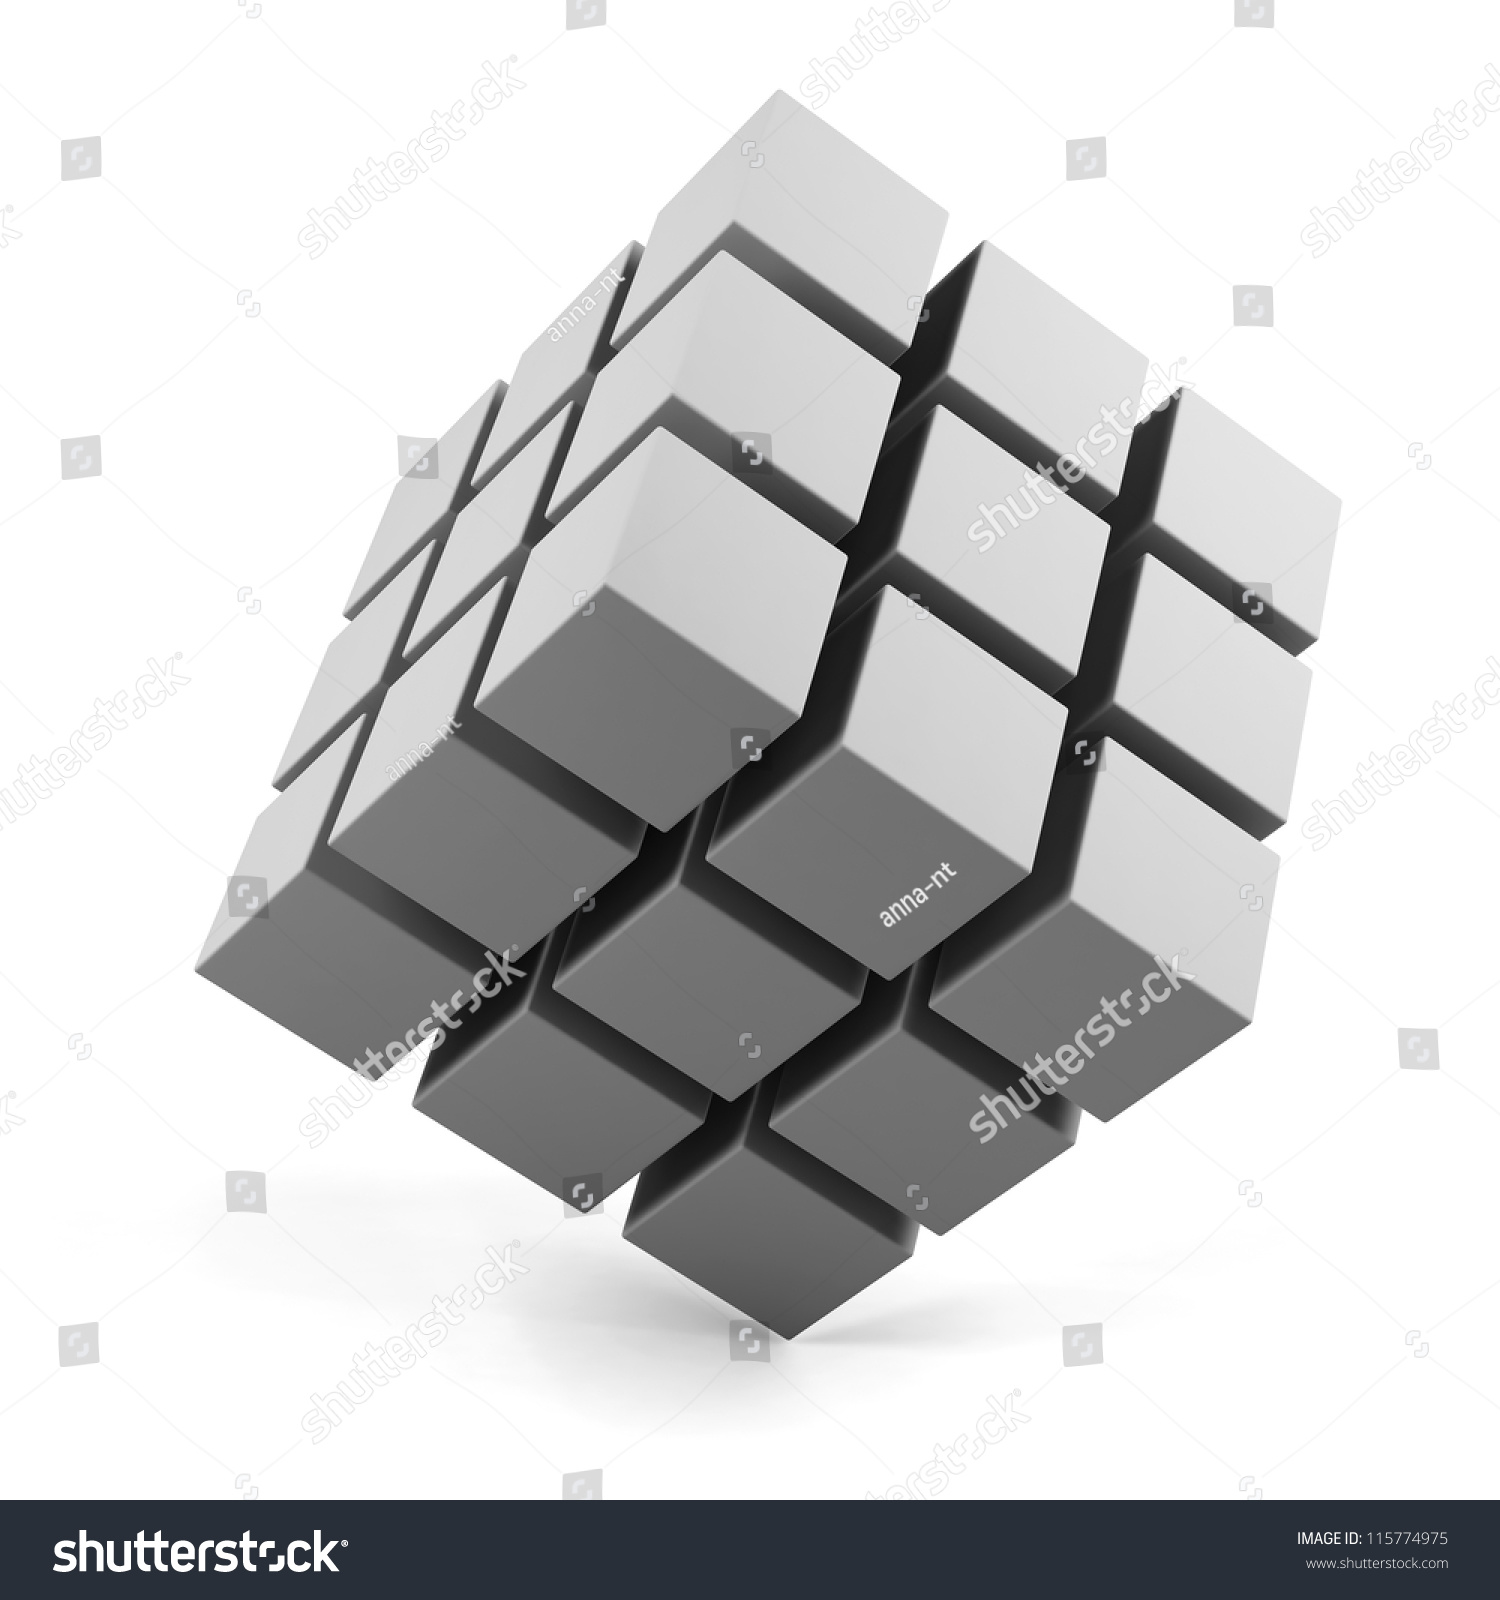 3d Cube Isolated On A White Stock Photo 115774975 : Shutterstock